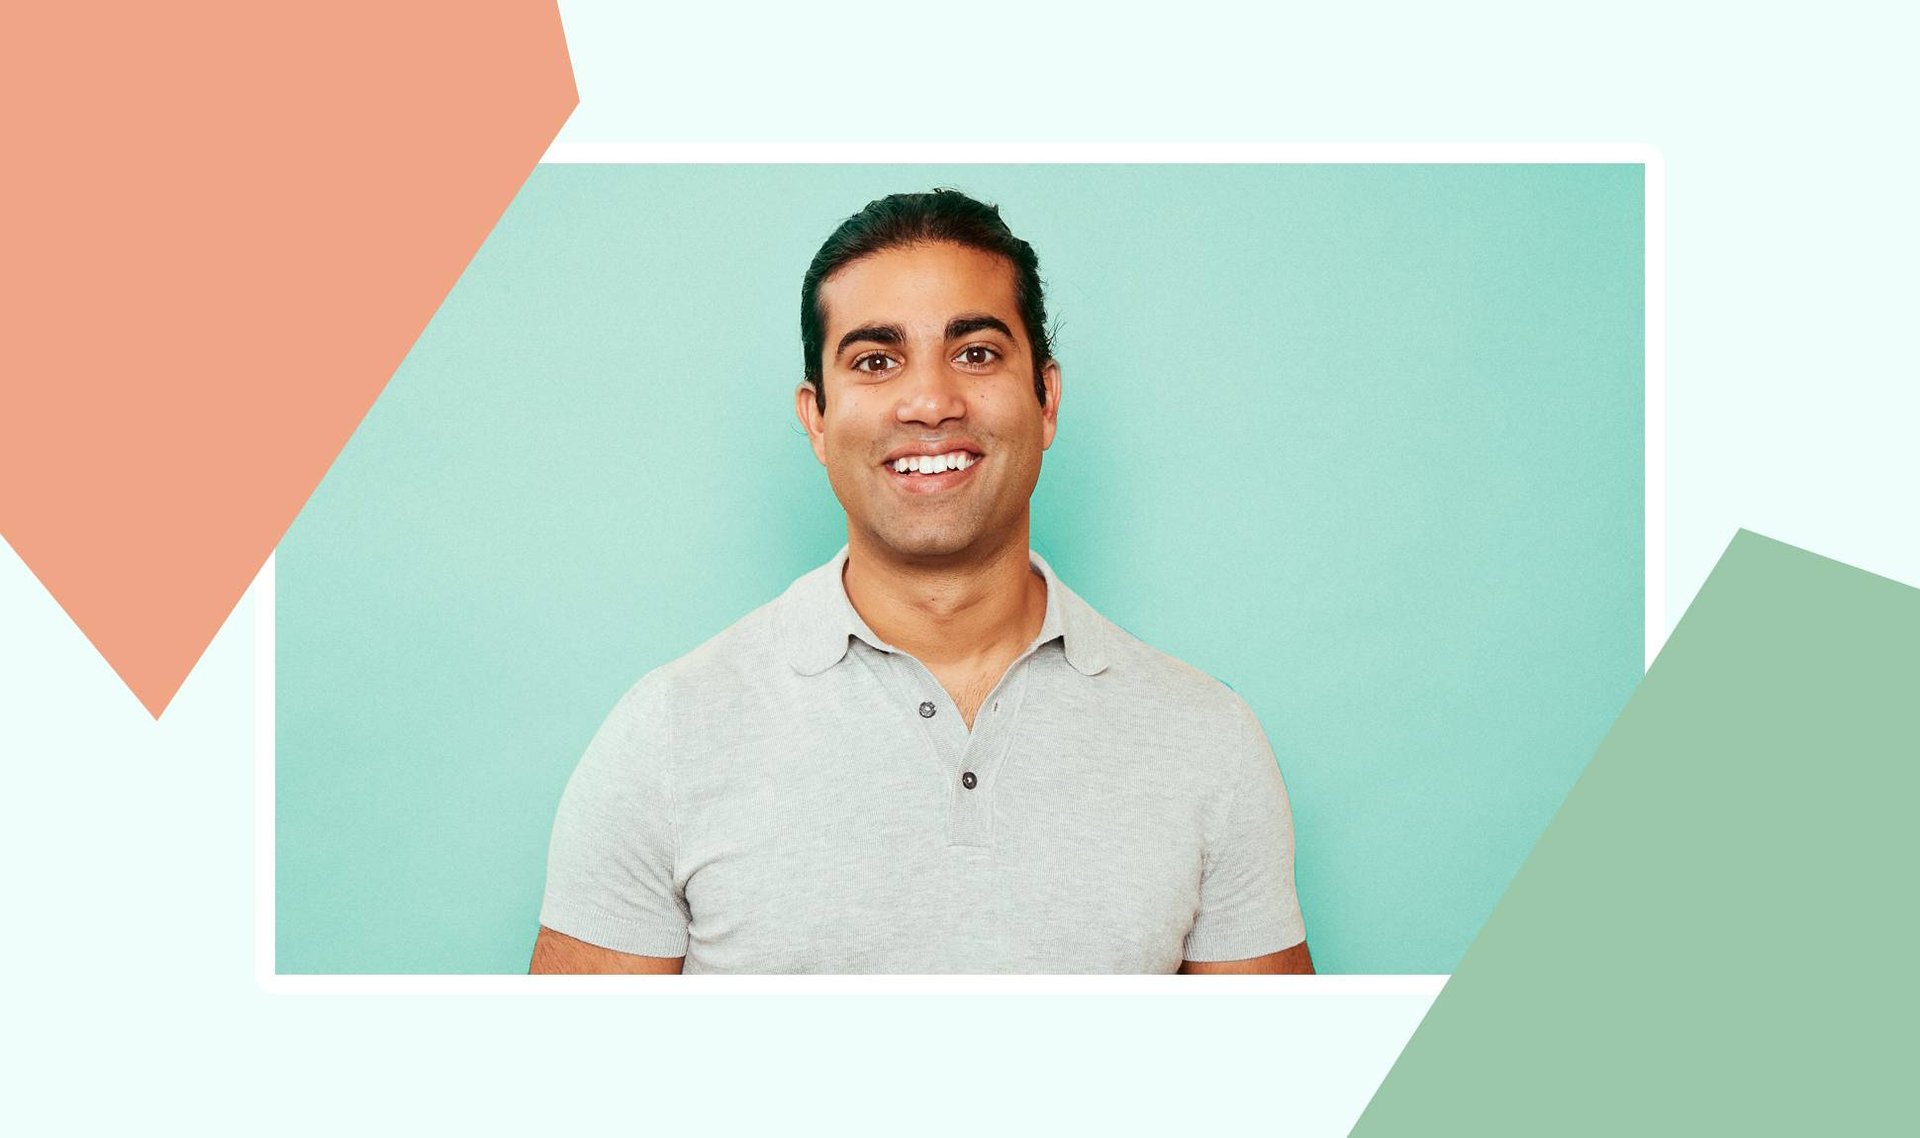 How Zahir Dossa, CEO and Co-Founder of Function of Beauty, Made Customizable Skin Care a Reality